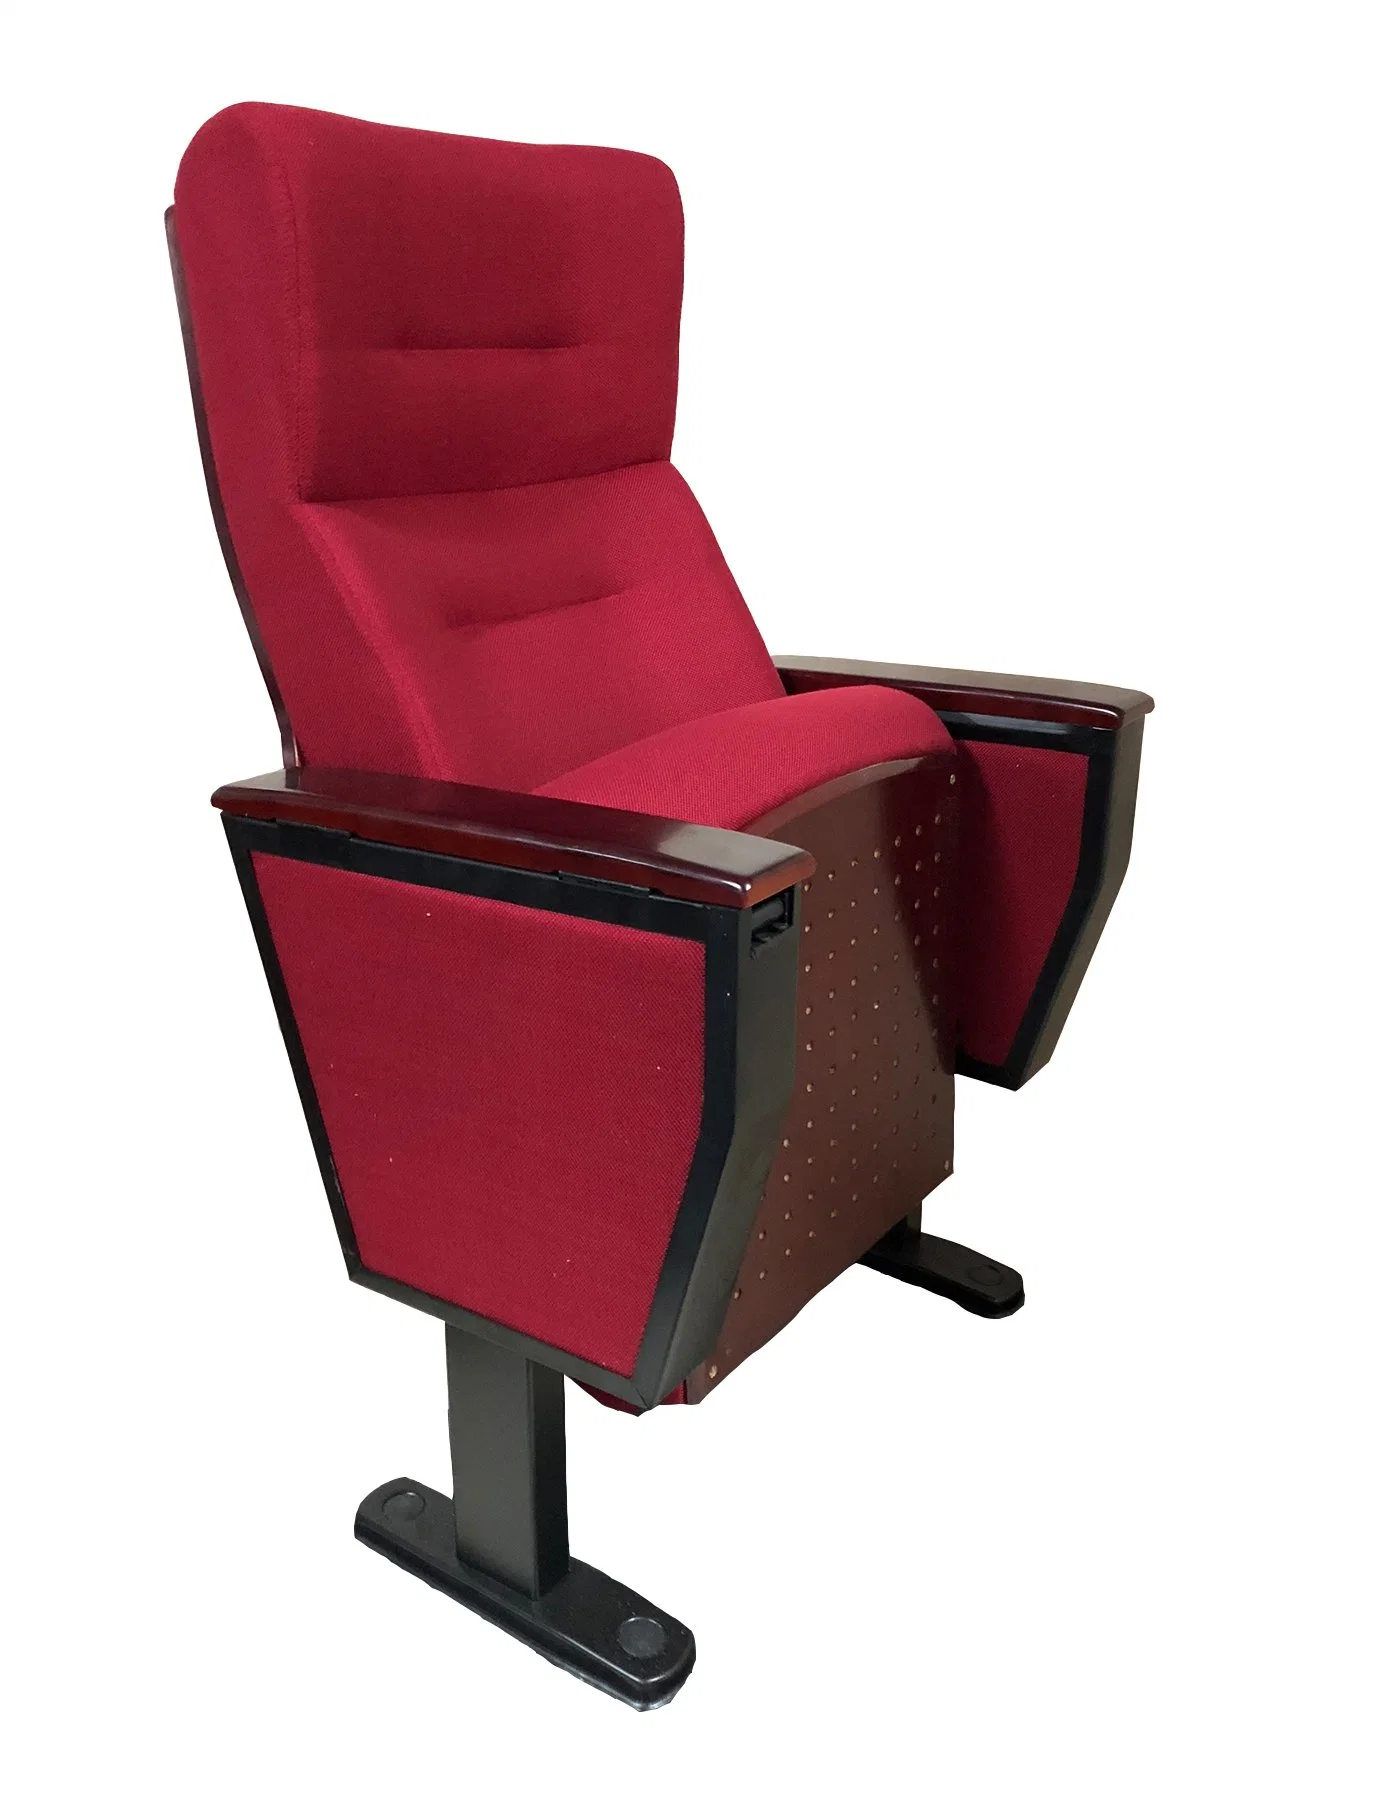 Cinema Chair Auditorium Chair VIP Theater Seats Theater Seating Furniture